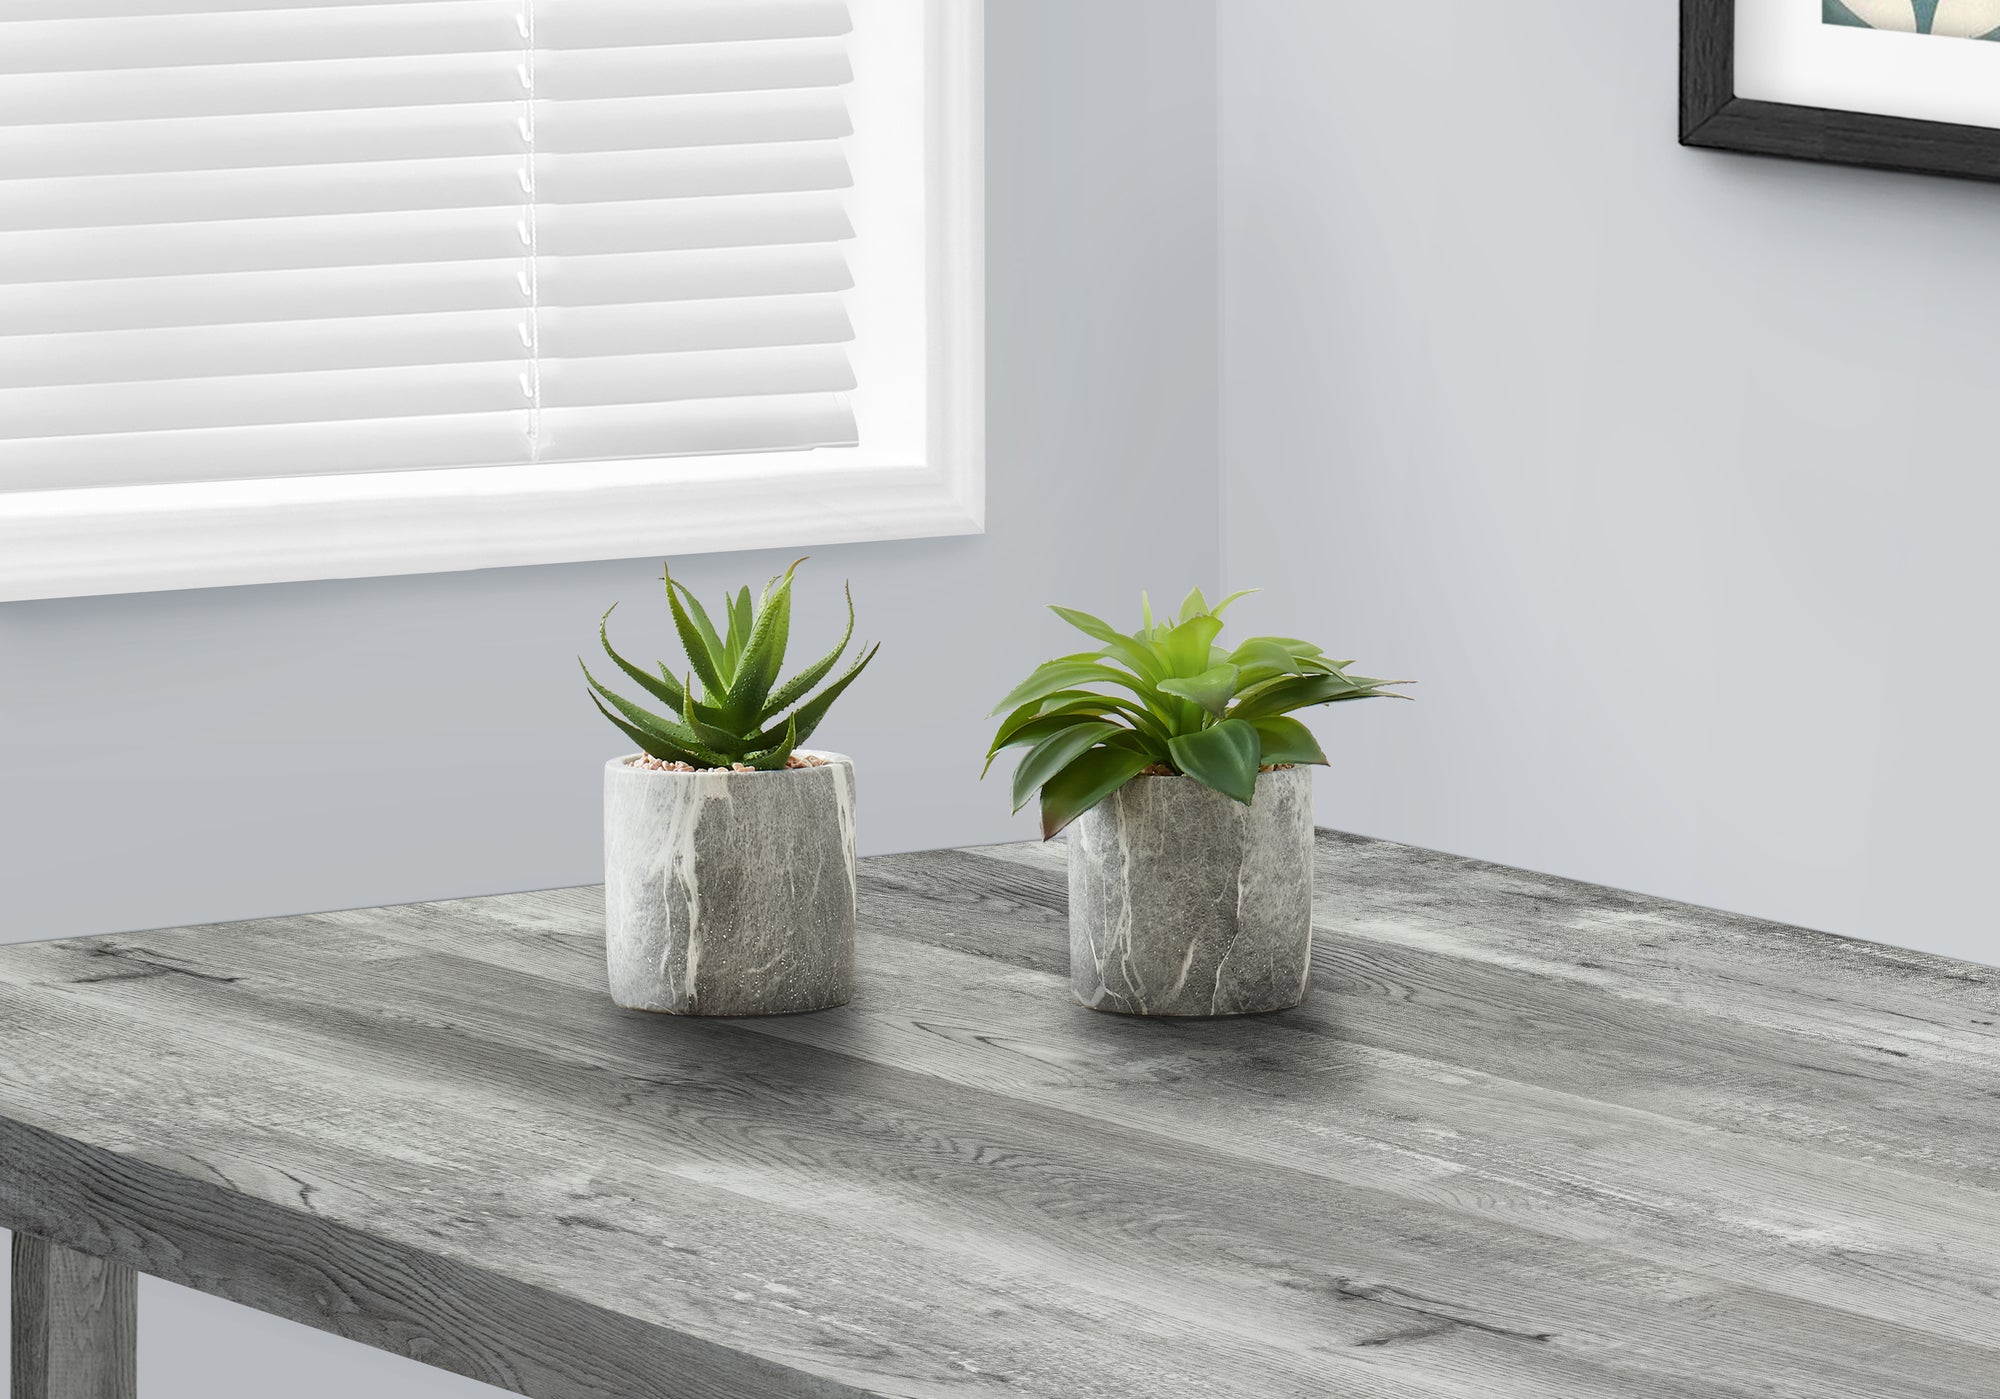 MN-769586    Artificial Plant, 6" Tall, Succulent, Indoor, Faux, Fake, Table, Greenery, Potted, Set Of 2, Decorative, Green Leaves, Grey Cement Pots